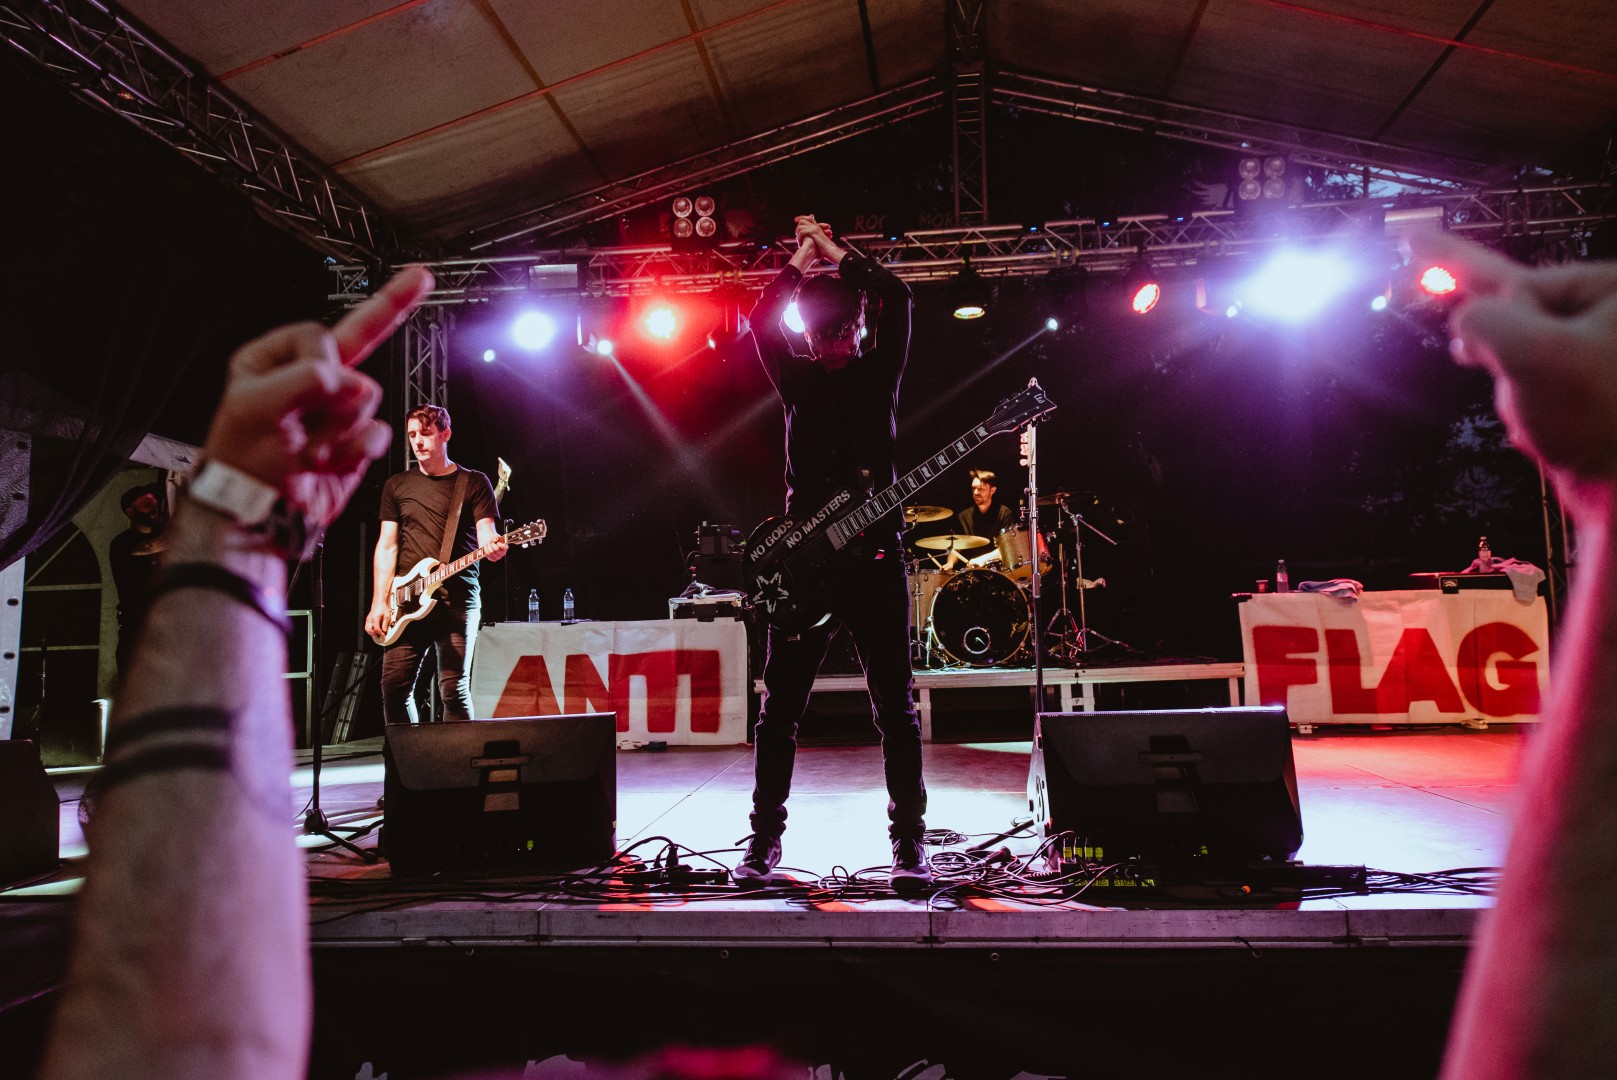 Anti-Flag at Quantic in Bucharest on July 5, 2022 (af37d4d384)